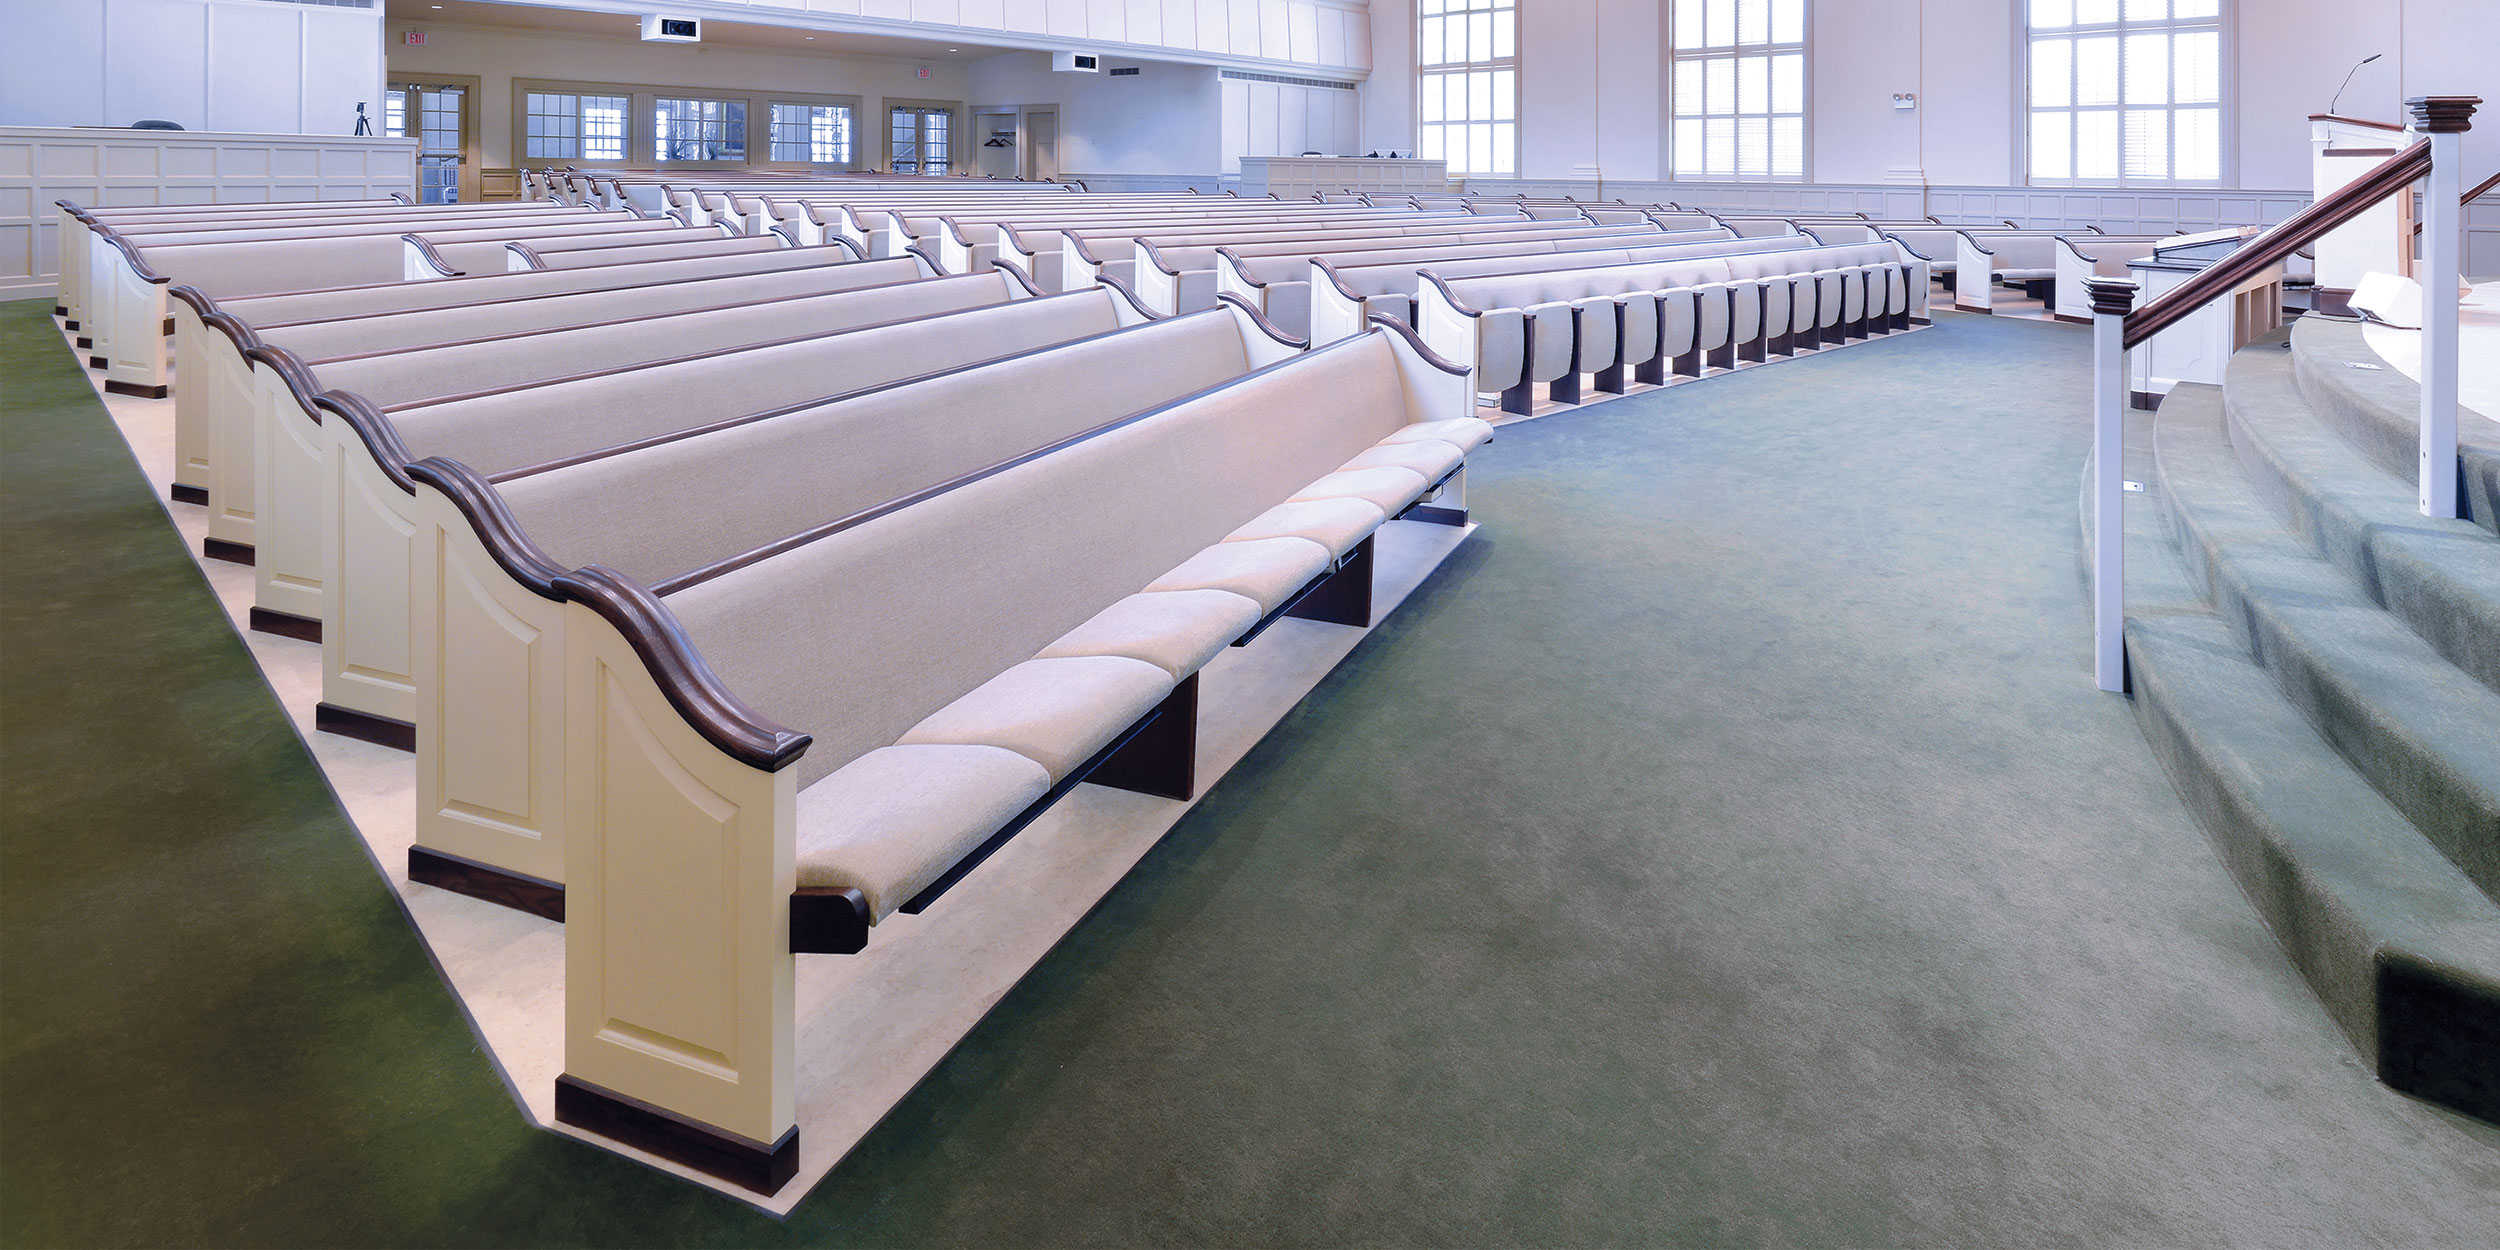 Fully Upholstered Church Pews with Individual Seats and Painted Colonial Pew Ends